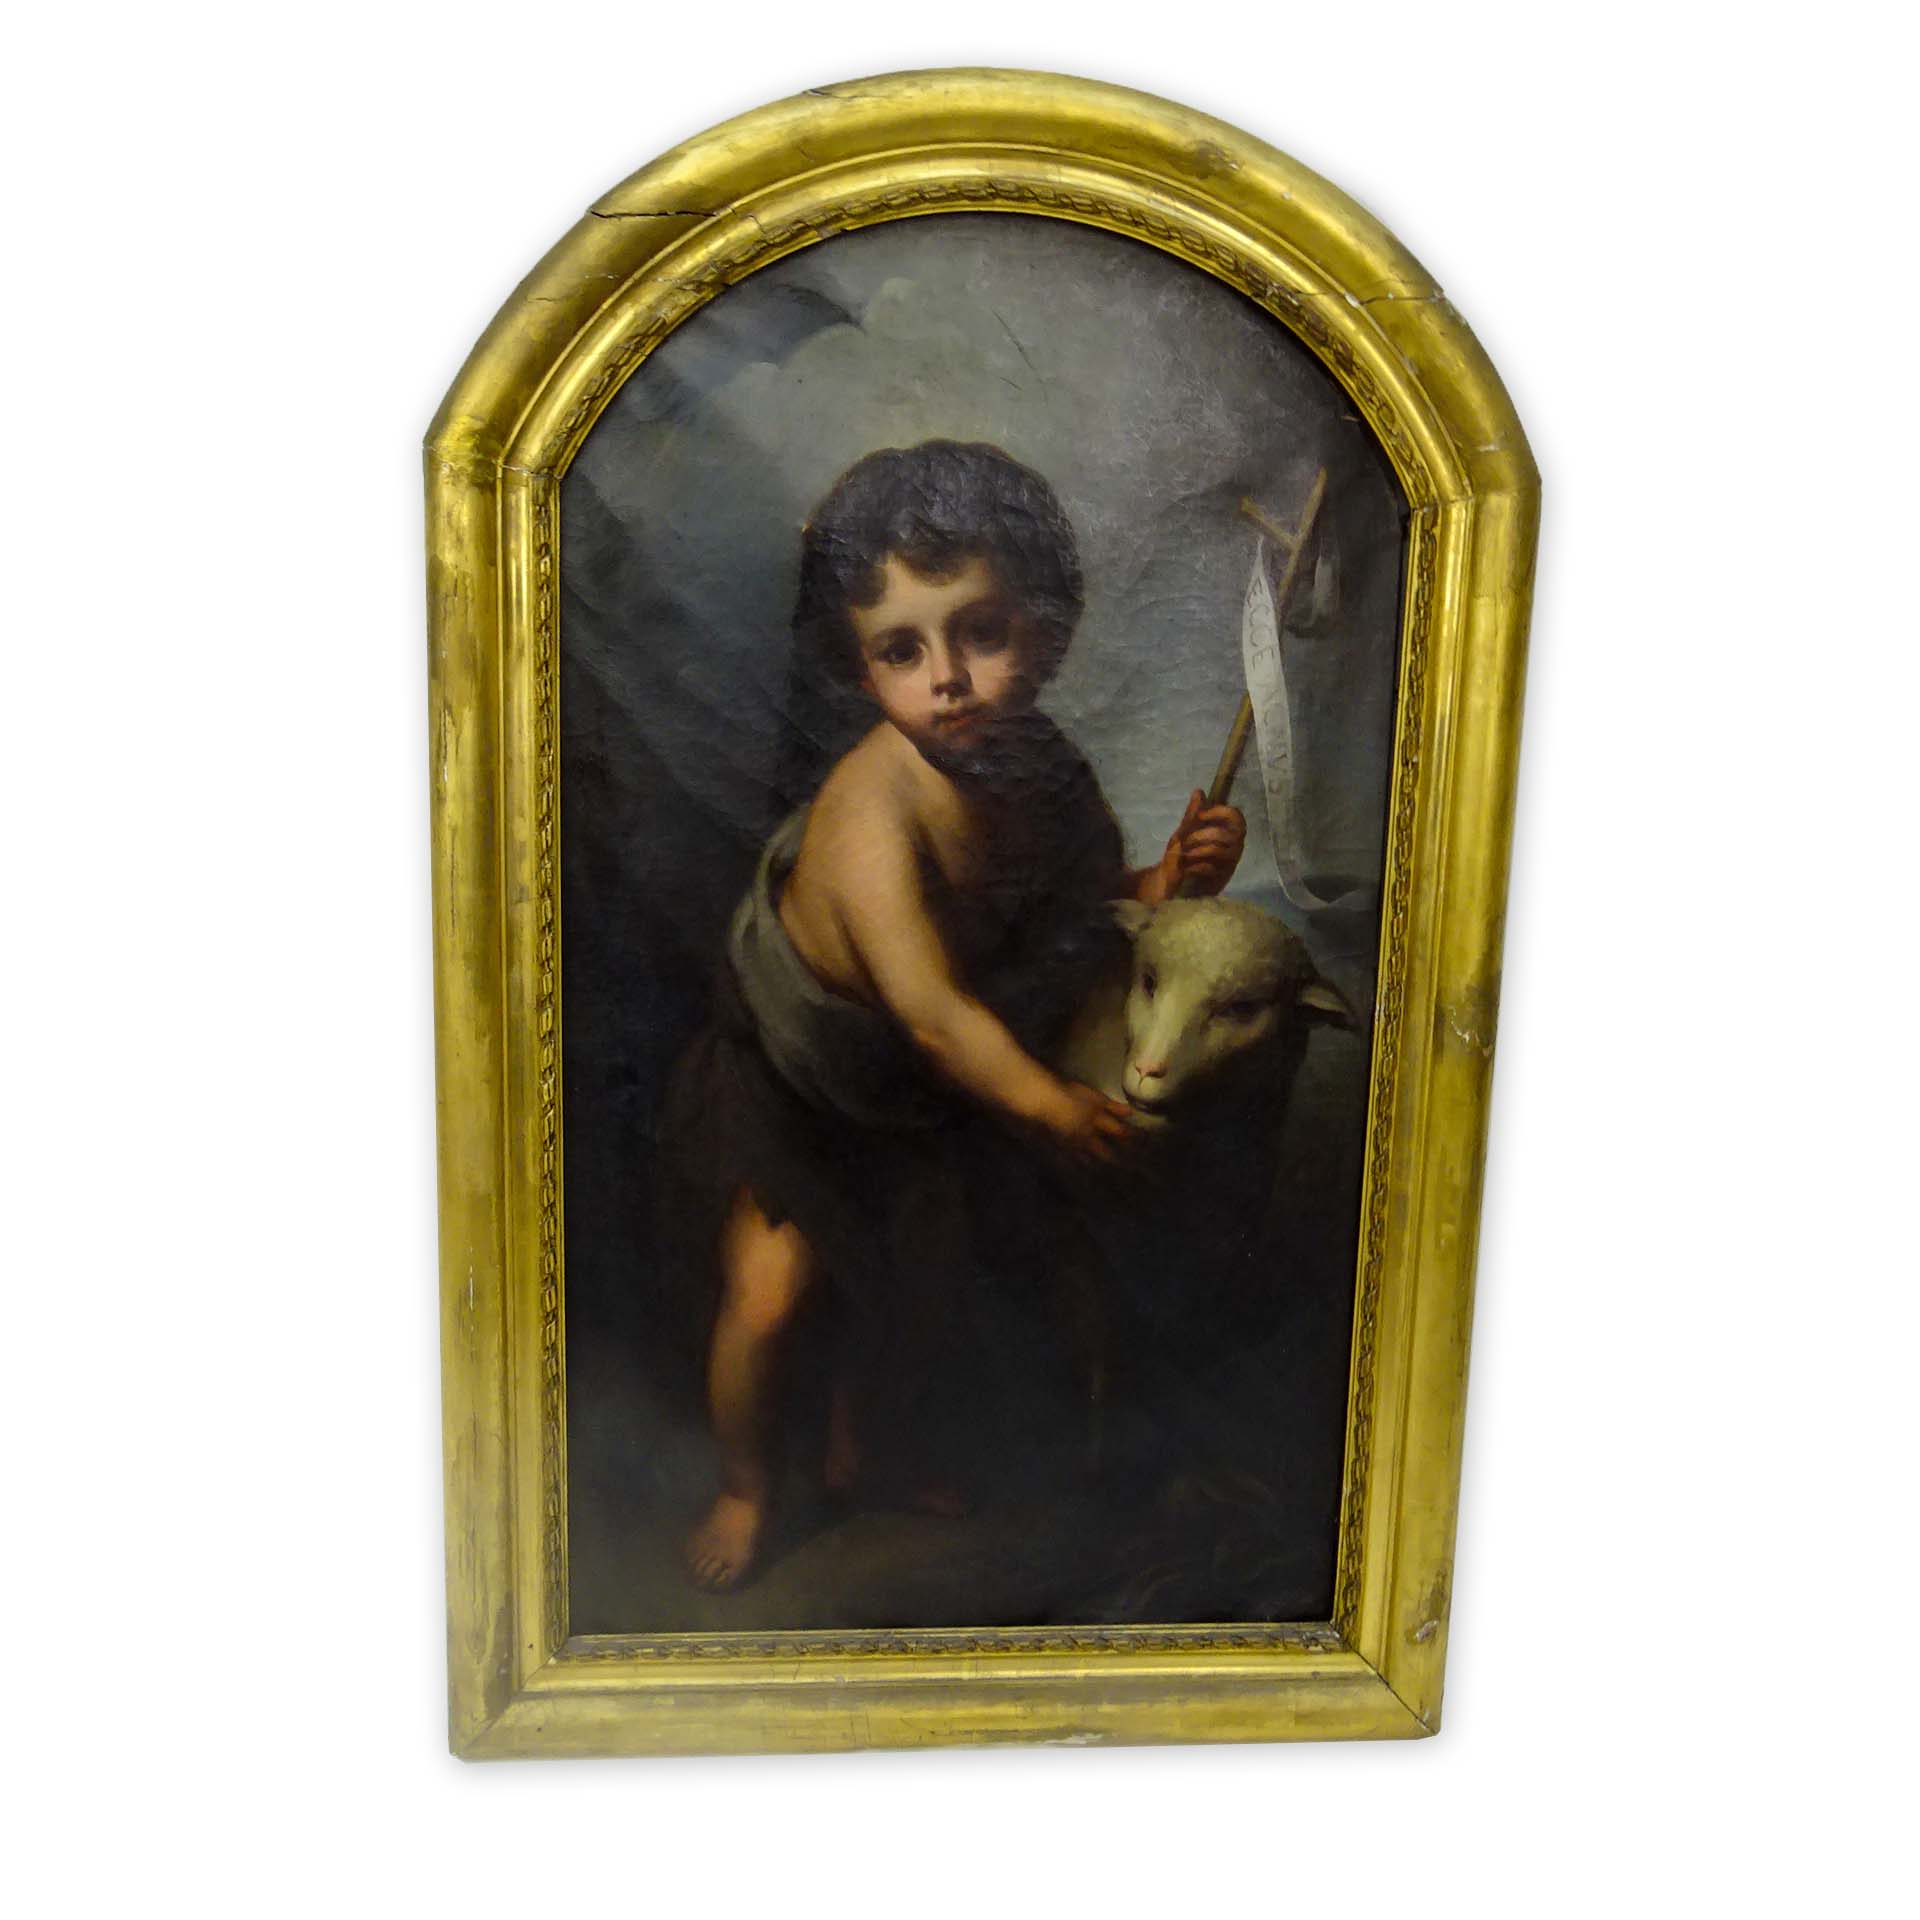 Late 18th or Early 19th Century Old Master Style "St. John the Baptist" Oil on Canvas Painting. 